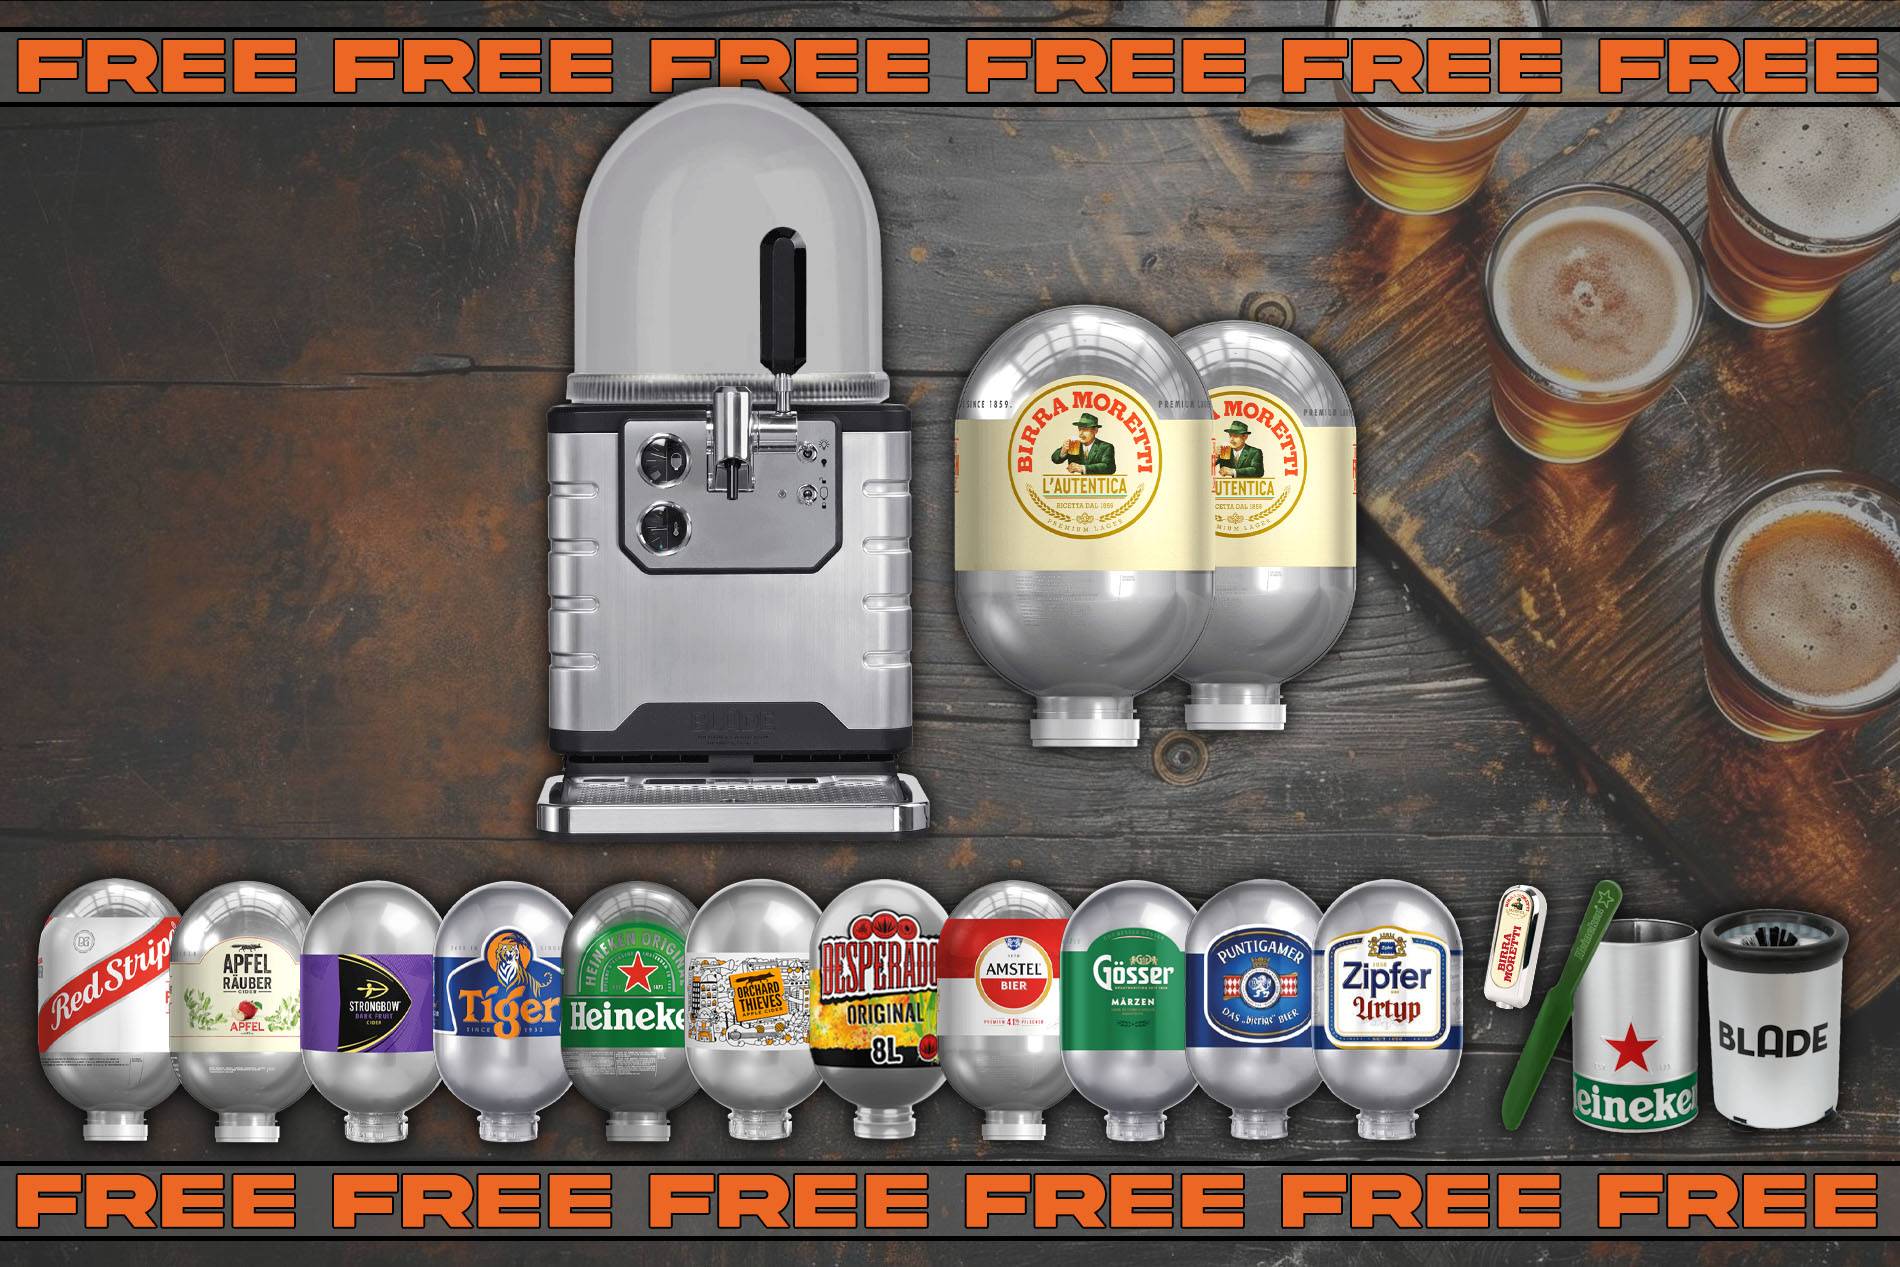 Free To Enter: BLADE Beer Machine (Spend £1+ and receive a BLADE Keg Bundle)